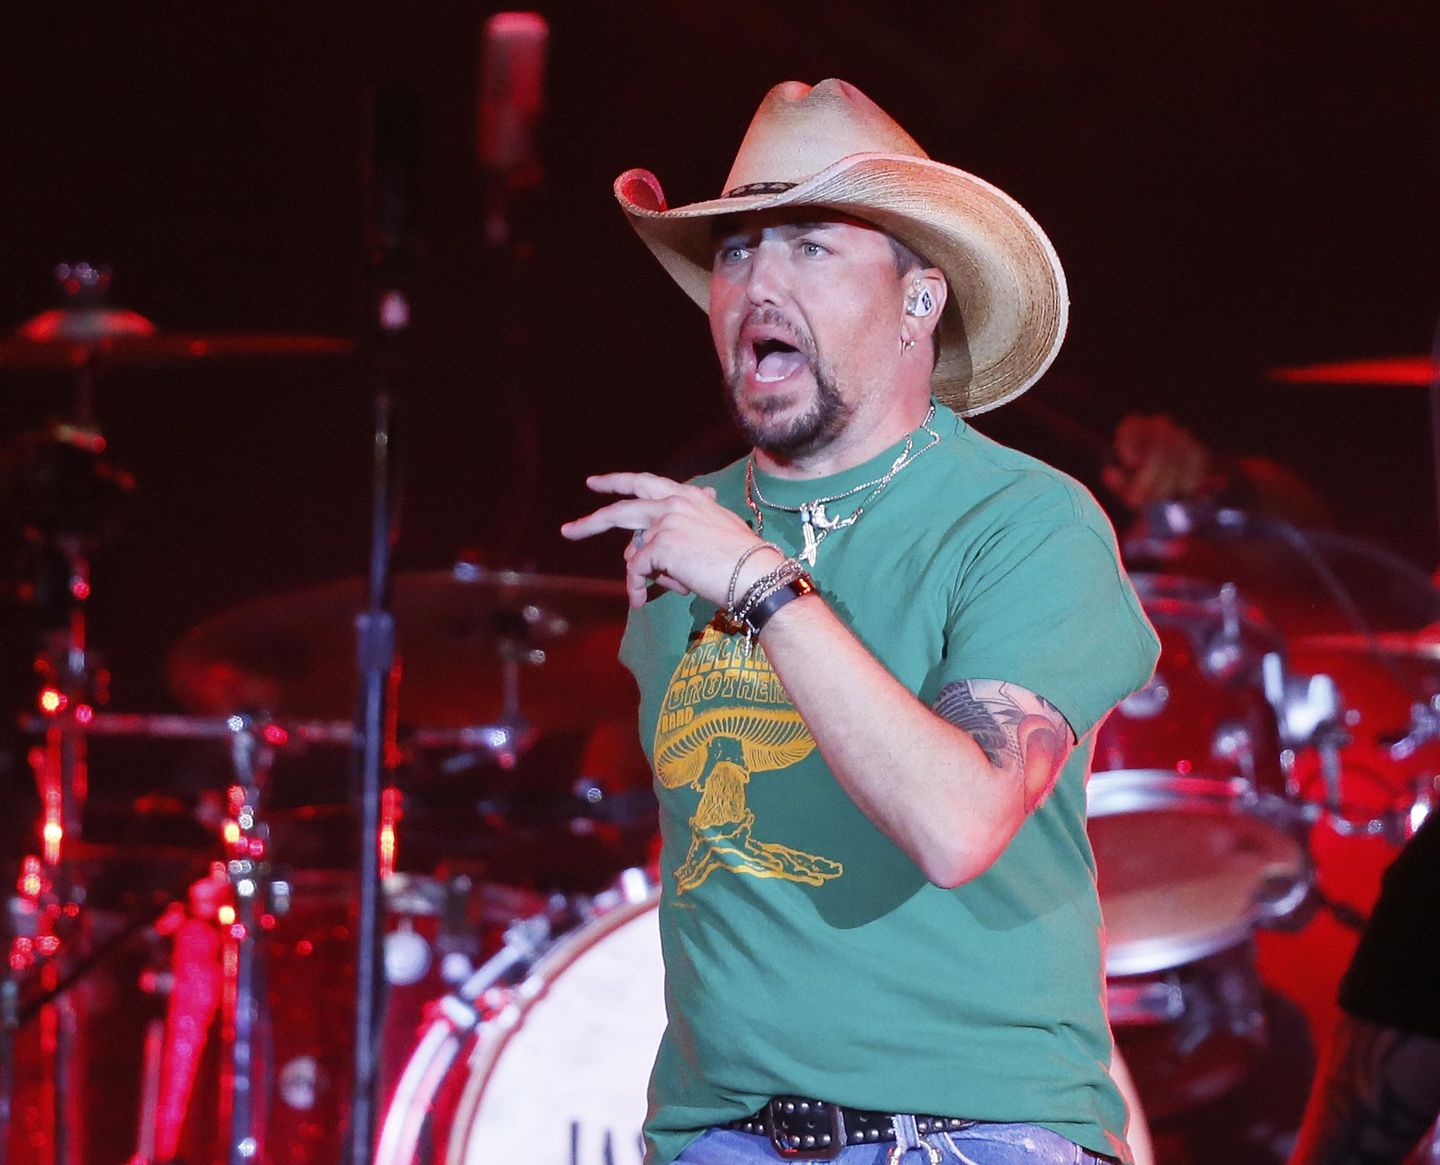 Jason Aldean 'Try That in a Small Town' hits No. 1 on Billboard Hot 100